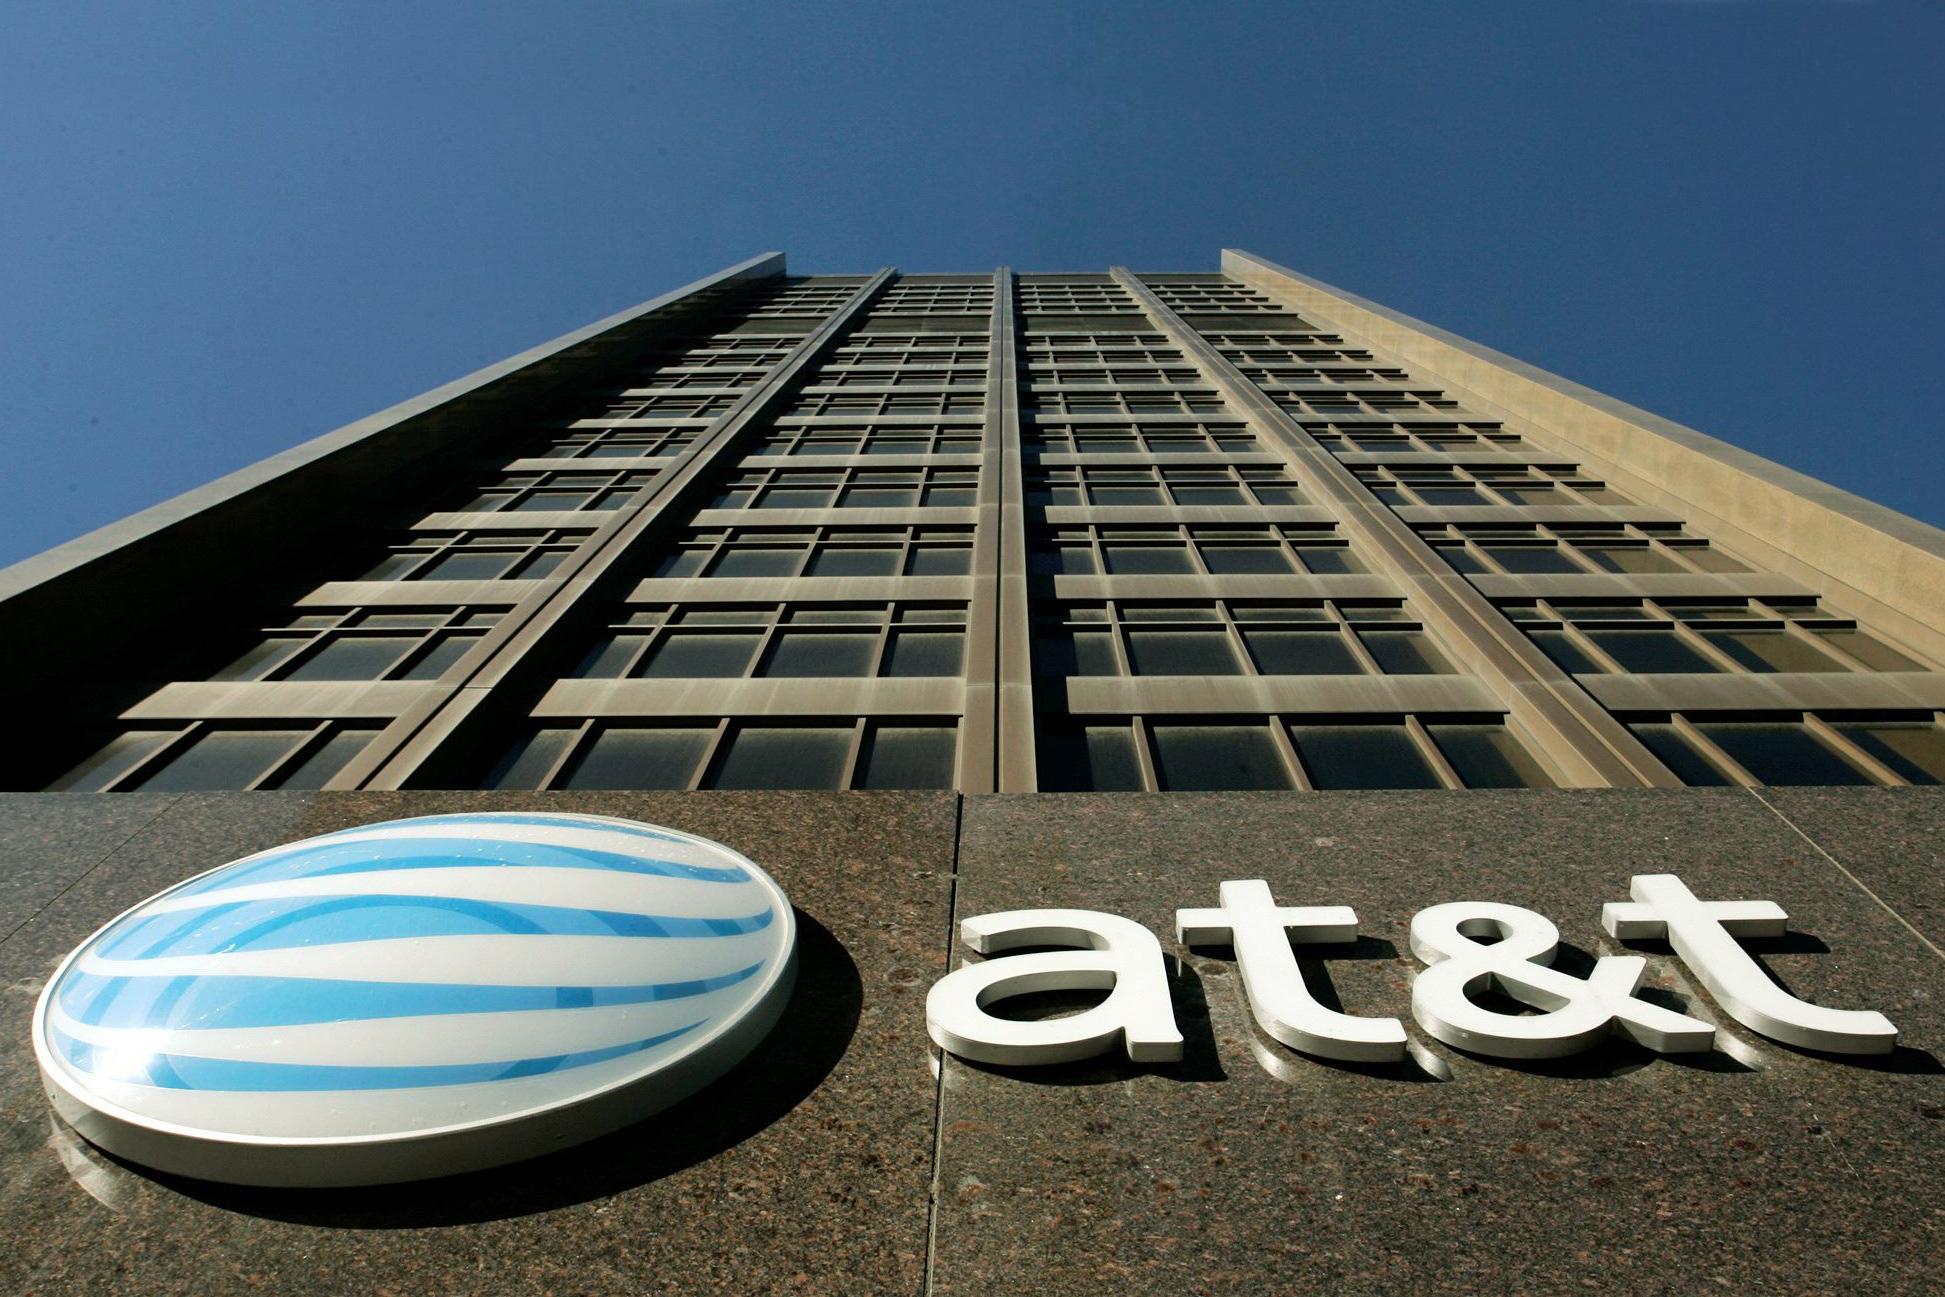 Deal: Buy one phone from AT&T and get the second one for free. 1